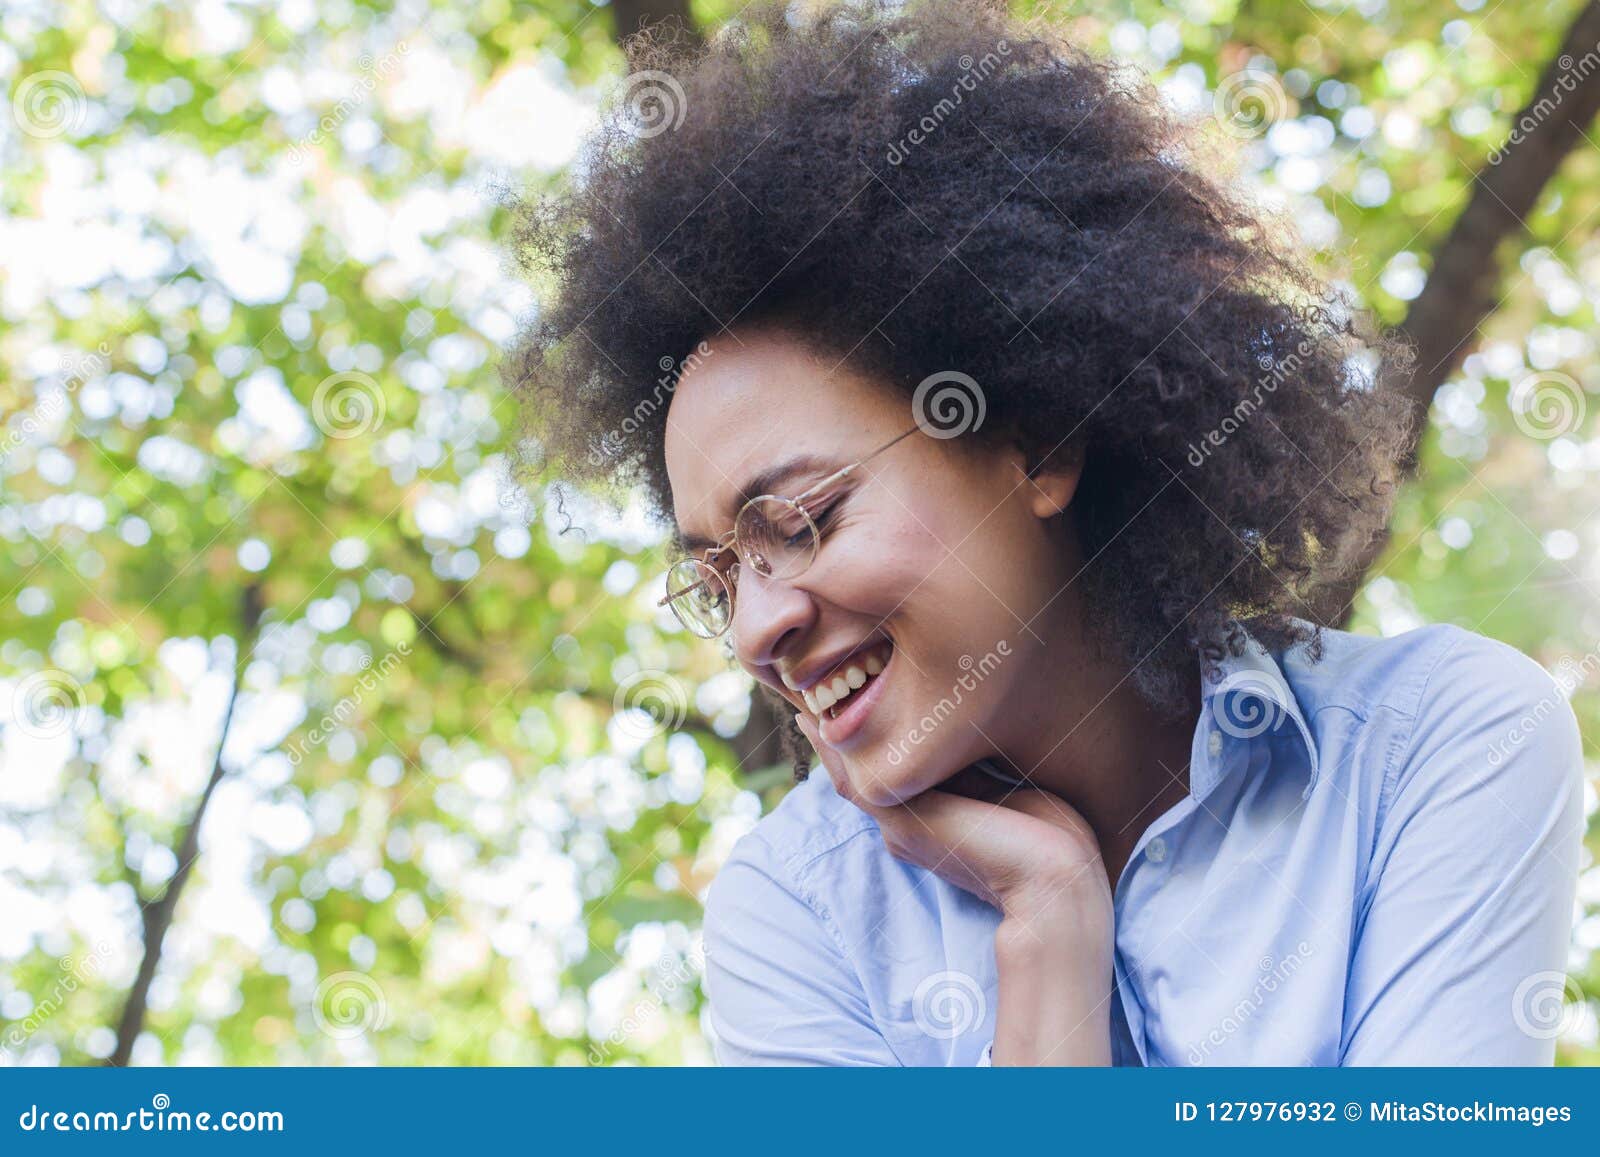 Lovely Young African American Woman Smiling In Nature Stock Photo